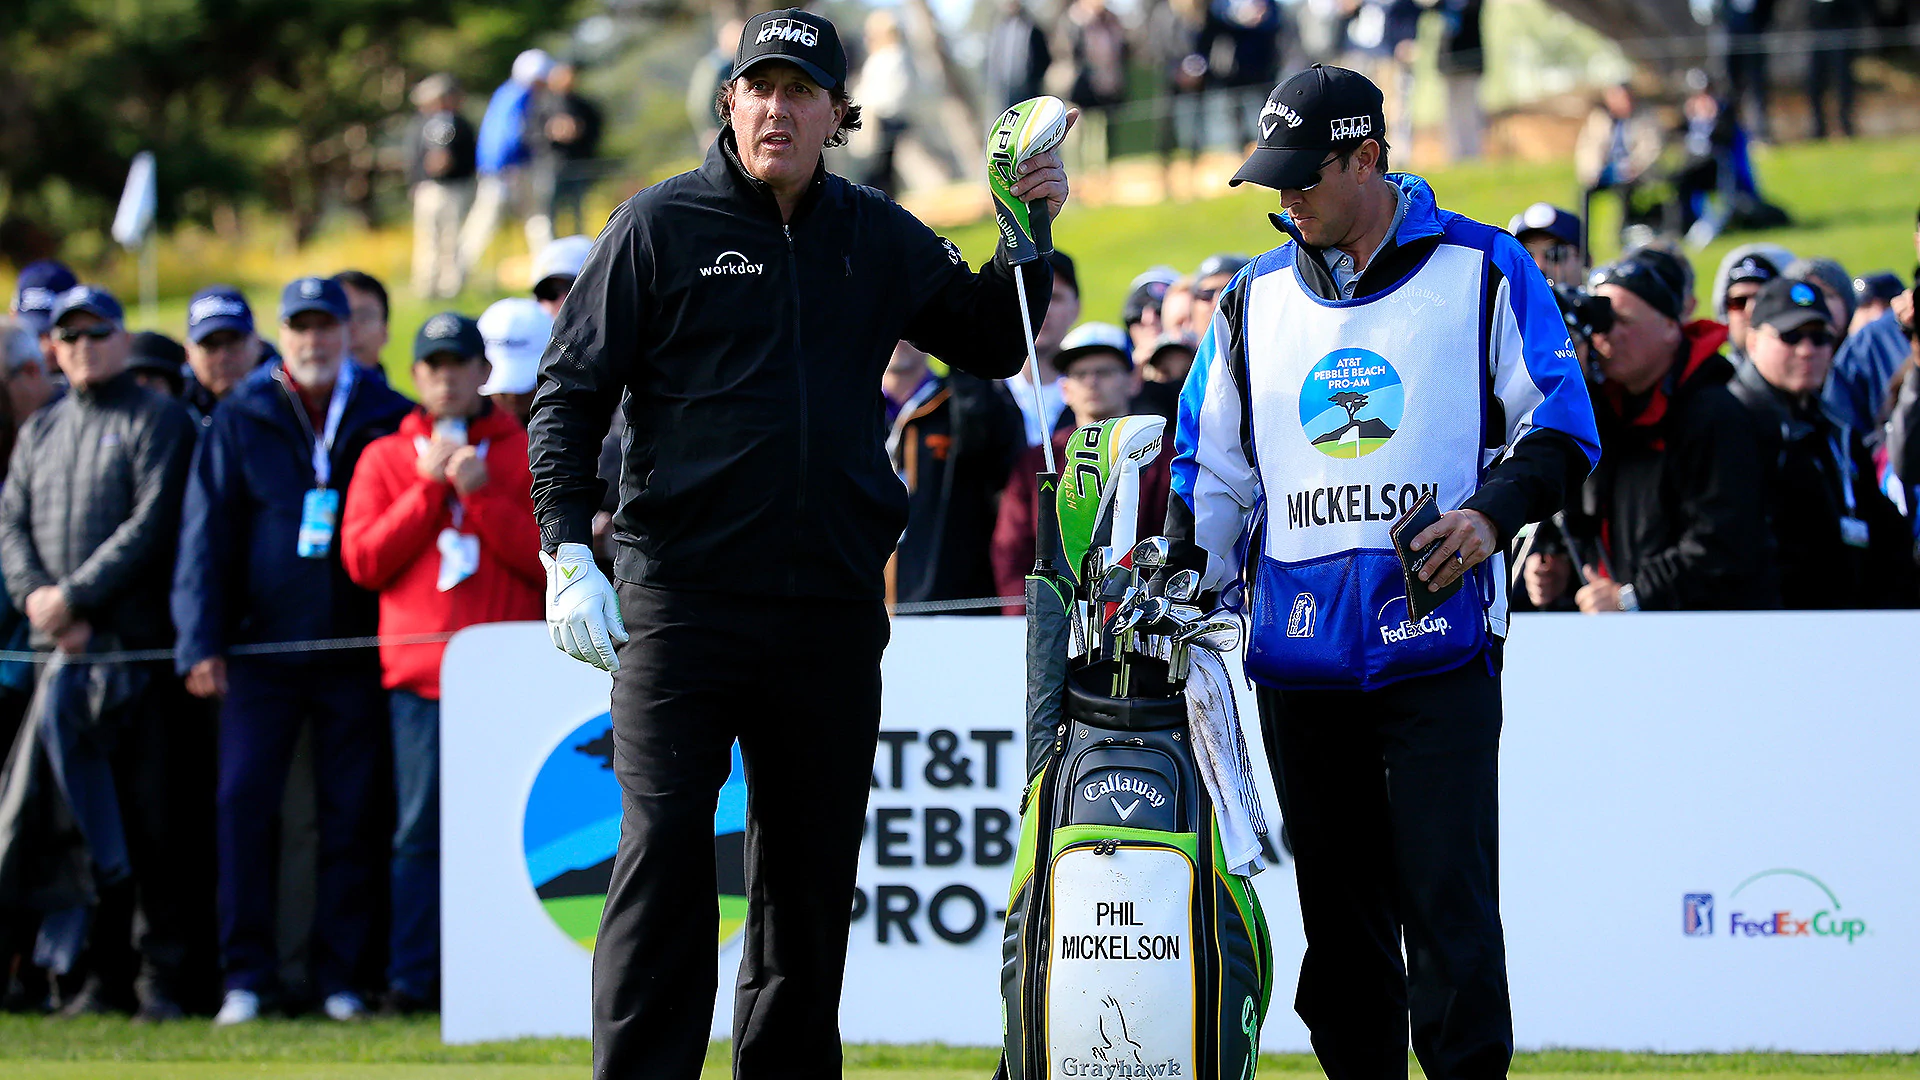 Mickelson leads by 3 as Pebble heads for Monday finish